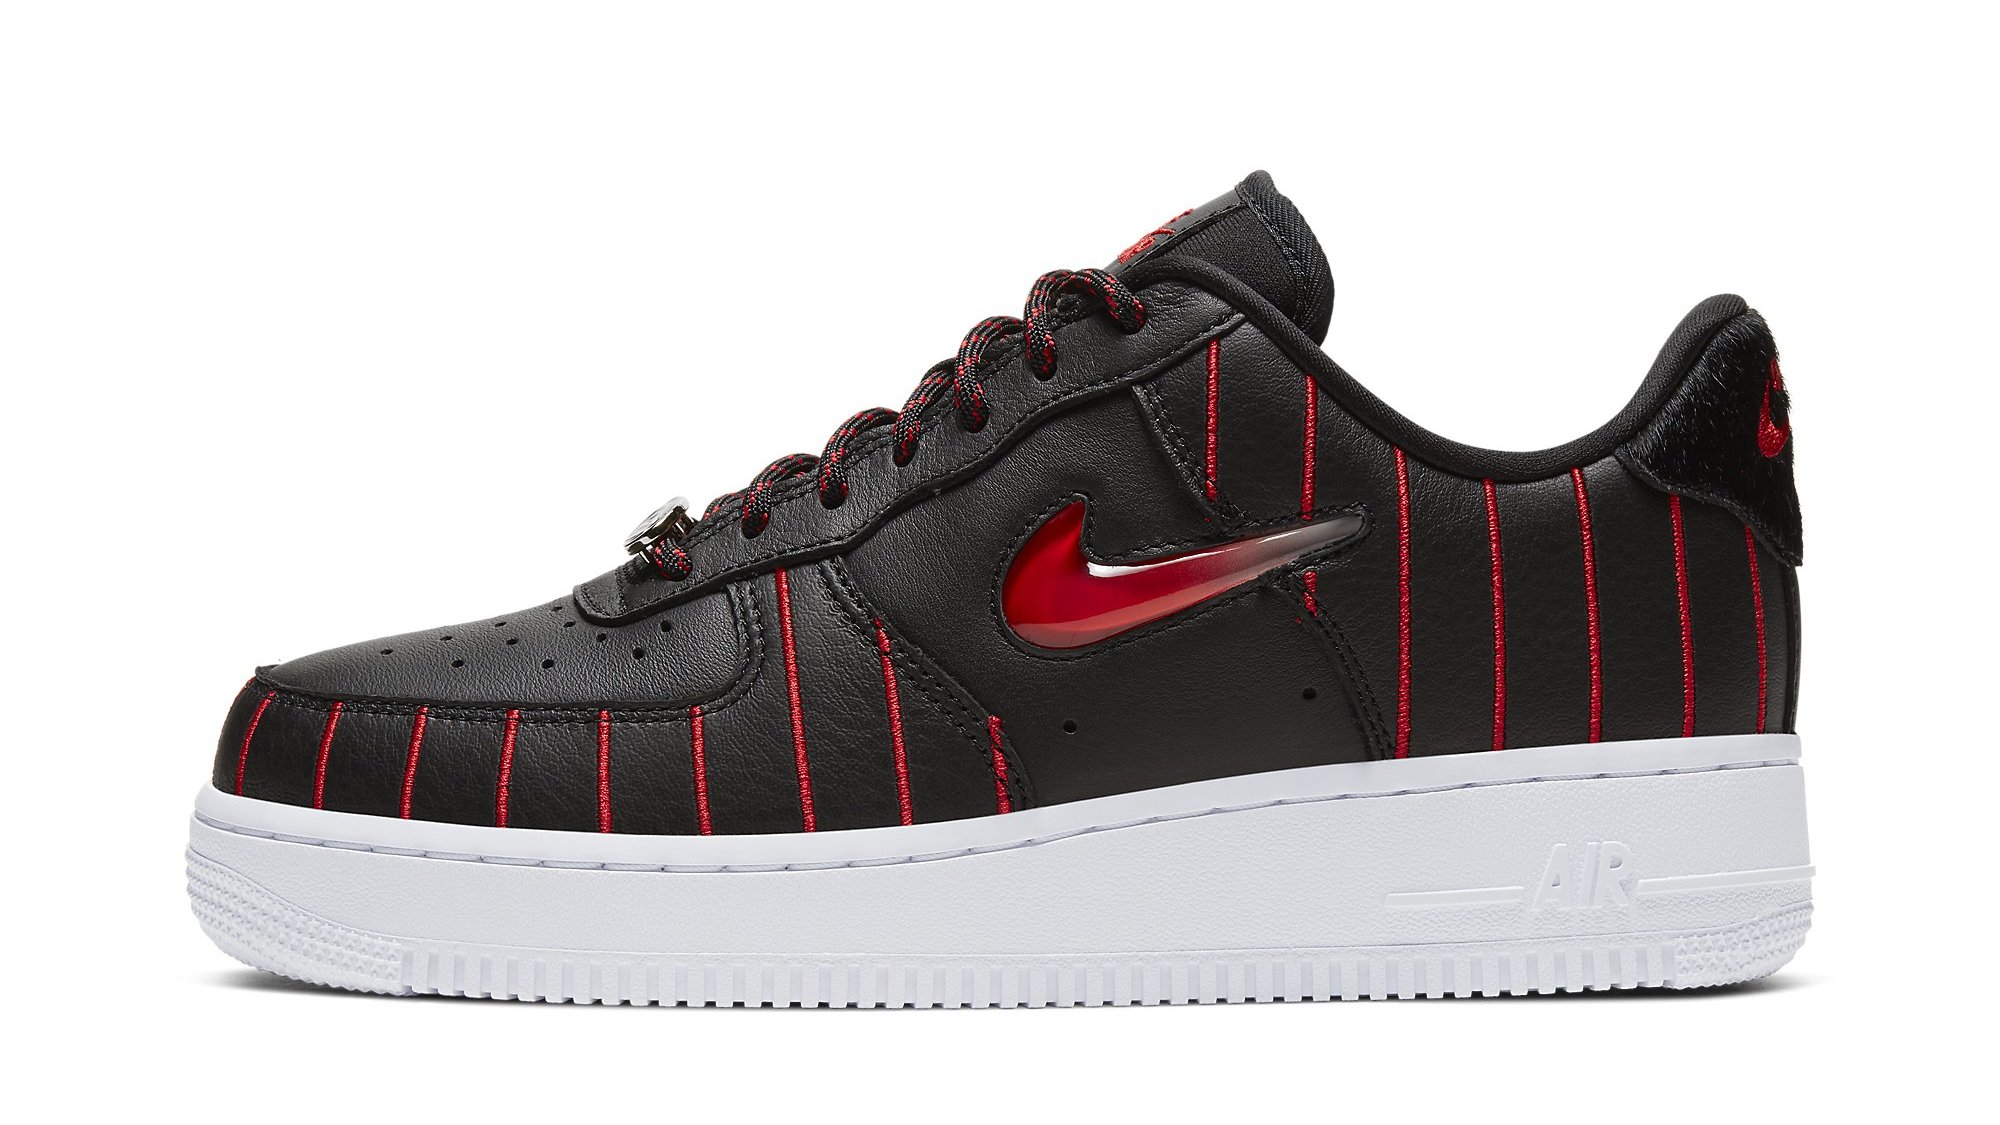 Nike Air Force 1 Low Jewel CU6359 001 Lateral